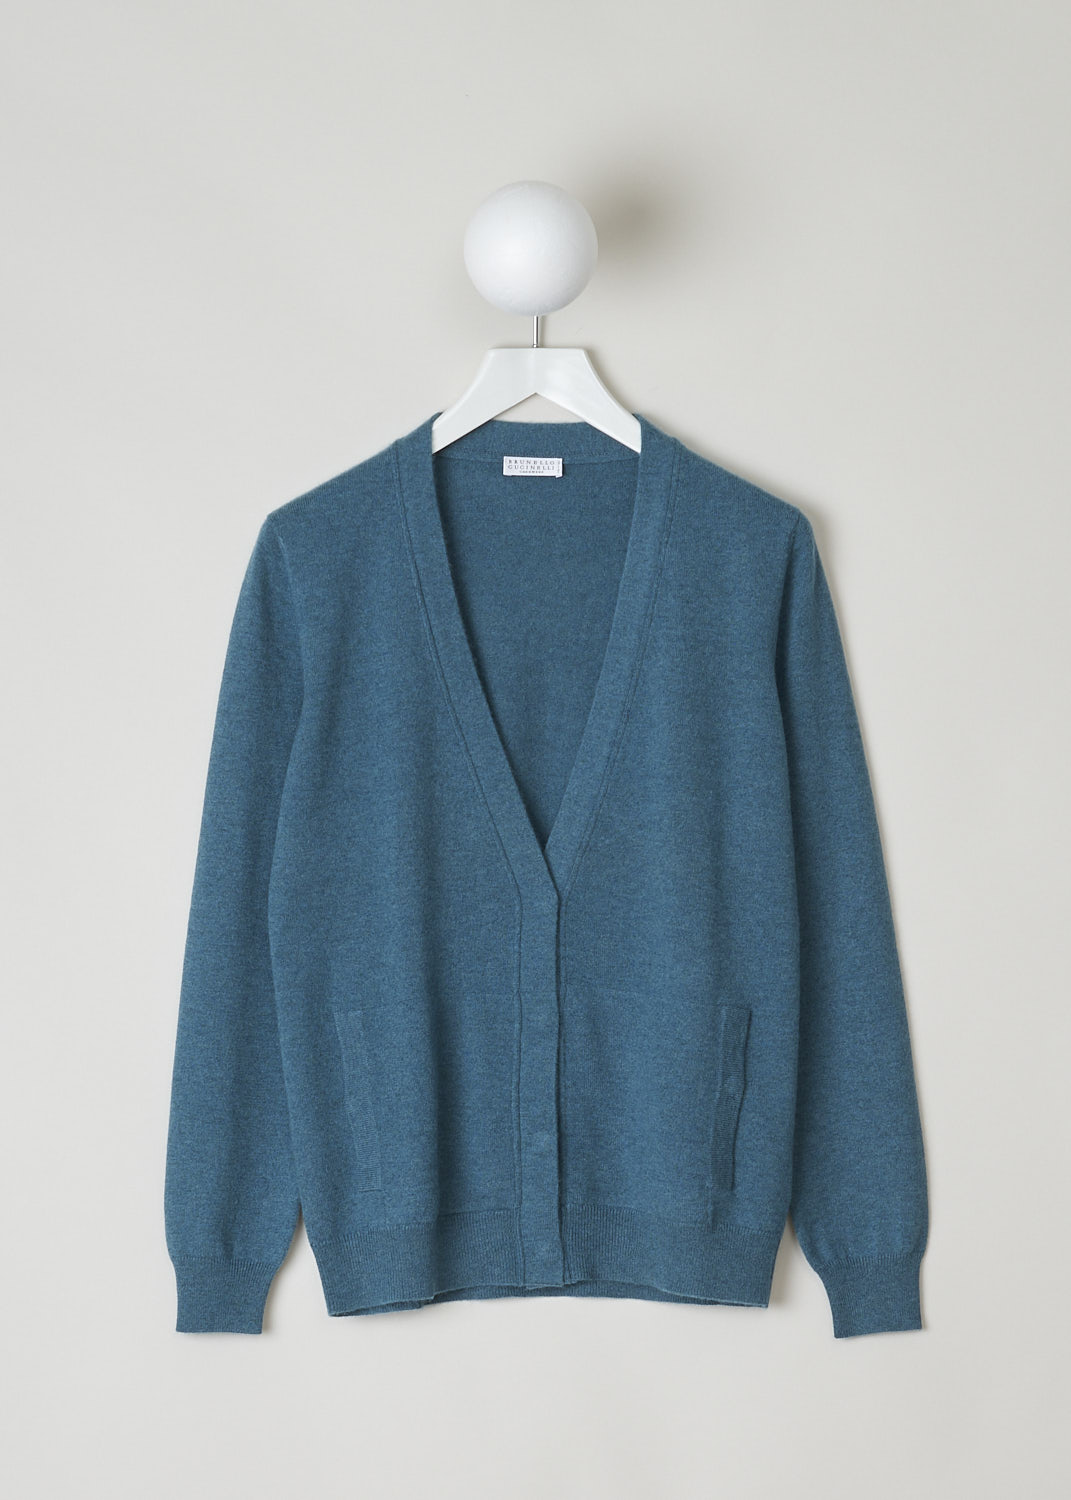 BRUNELLO CUCINELLI, TEAL GREEN CARDIGAN, M12144416_CC737, Green, Blue, Front, Teal green cardigan with a subtle monilli beaded trim in the back of the neck. The cardigan has a V-neckline and concealed front button closure with  press studs. The hemline and cuffs have a ribbed finish. The cardigan has patch pockets with press studs in the front. 
